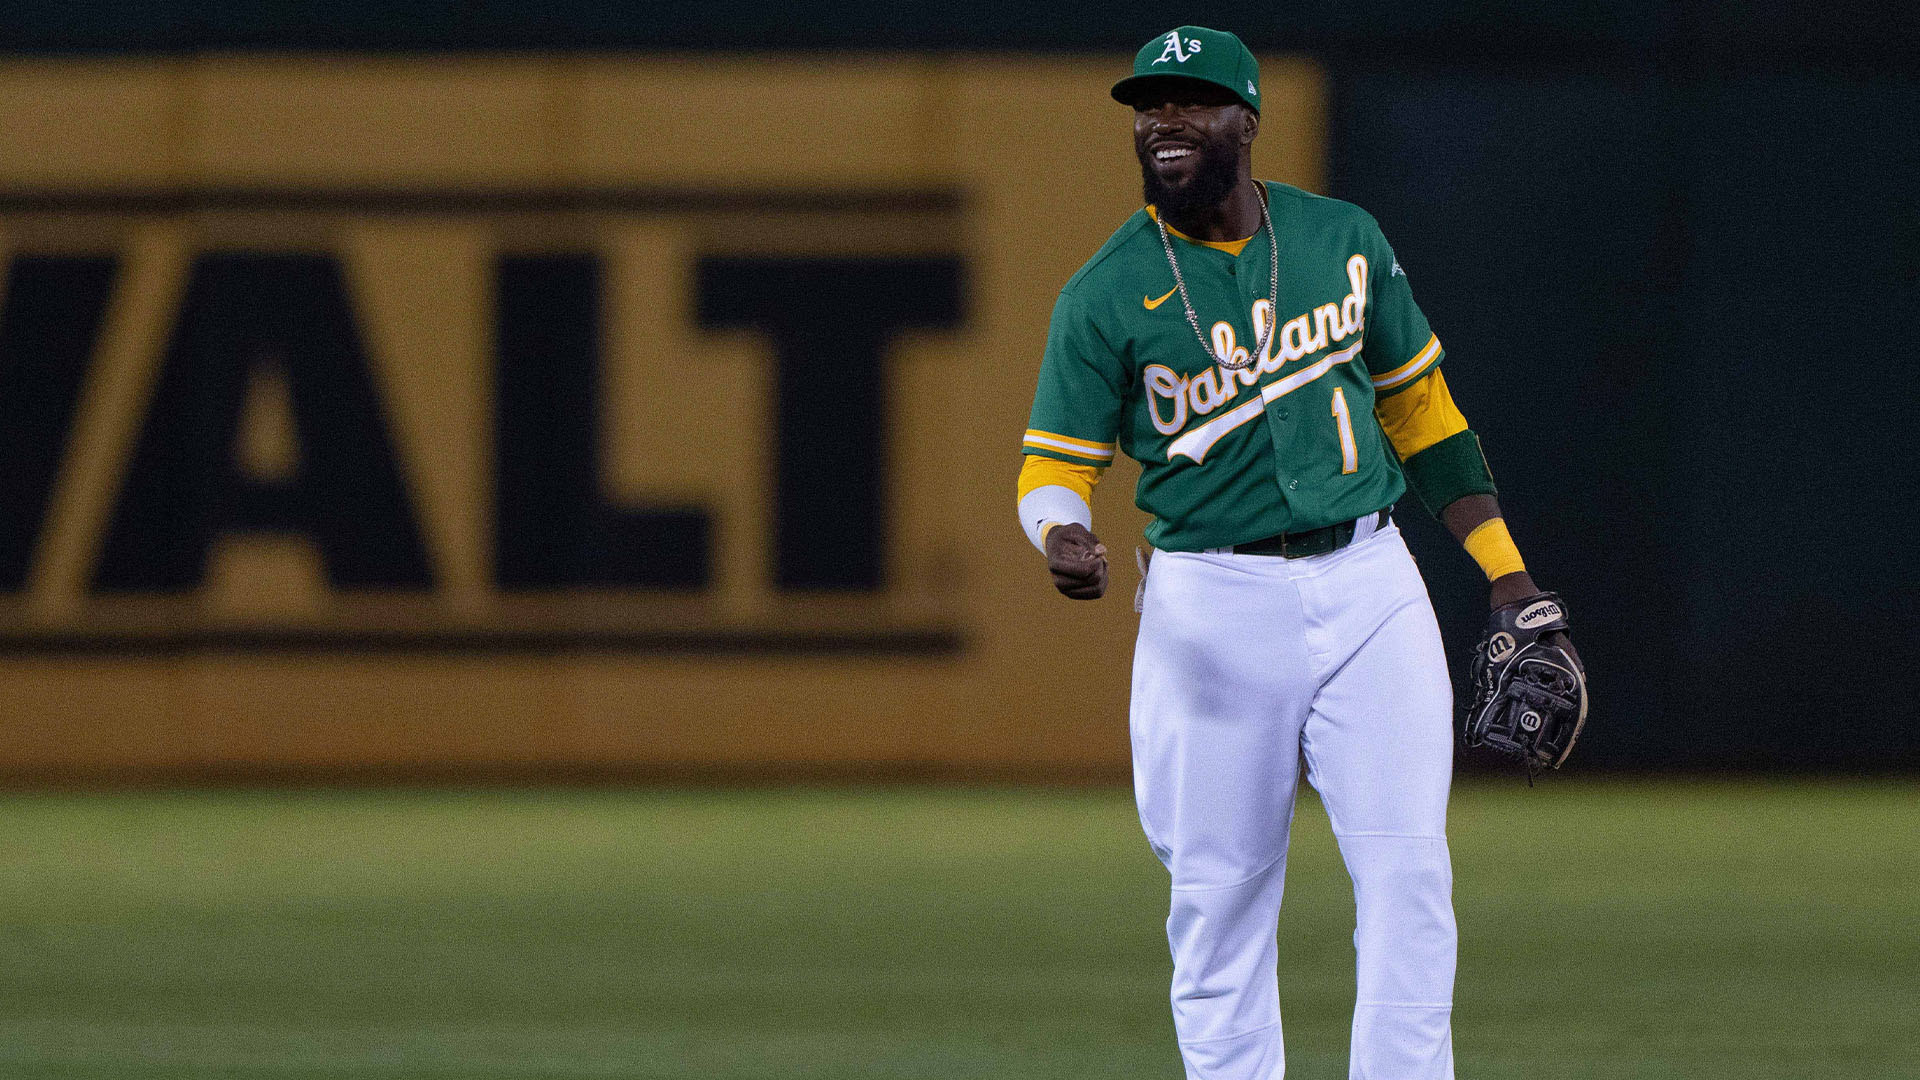 Josh Harrison, free-agent infielder, signs with White Sox